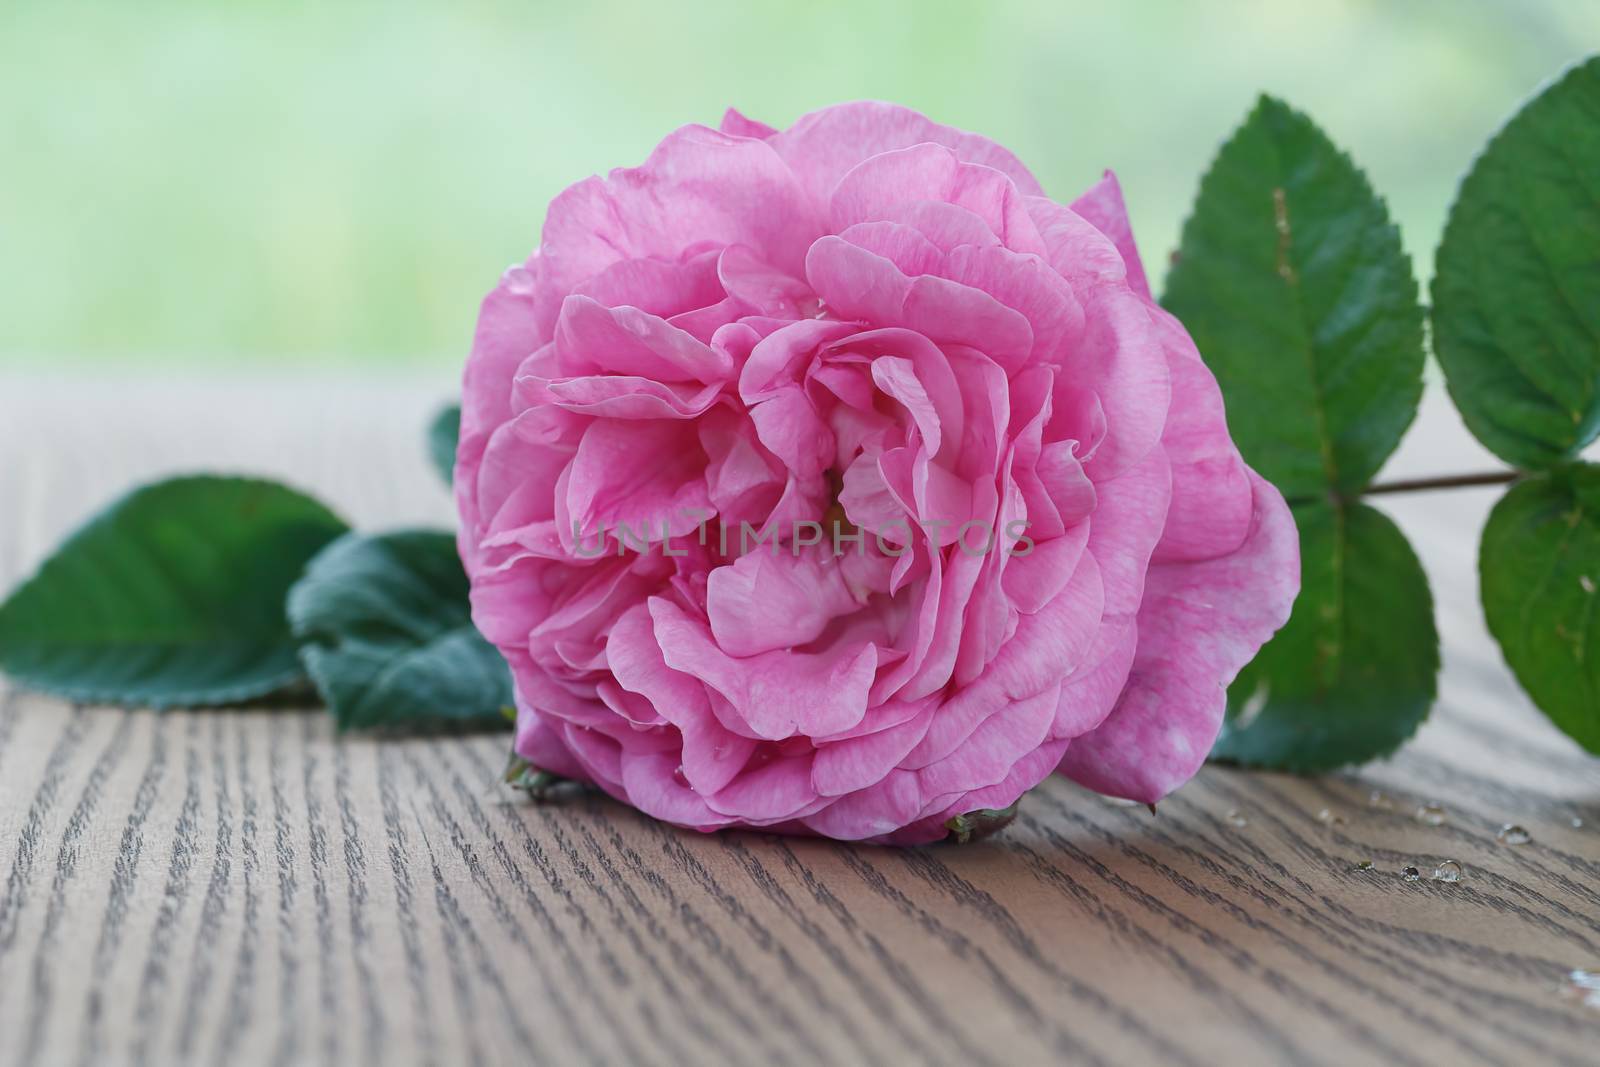 Beautiful pink tea rose on a wooden background.